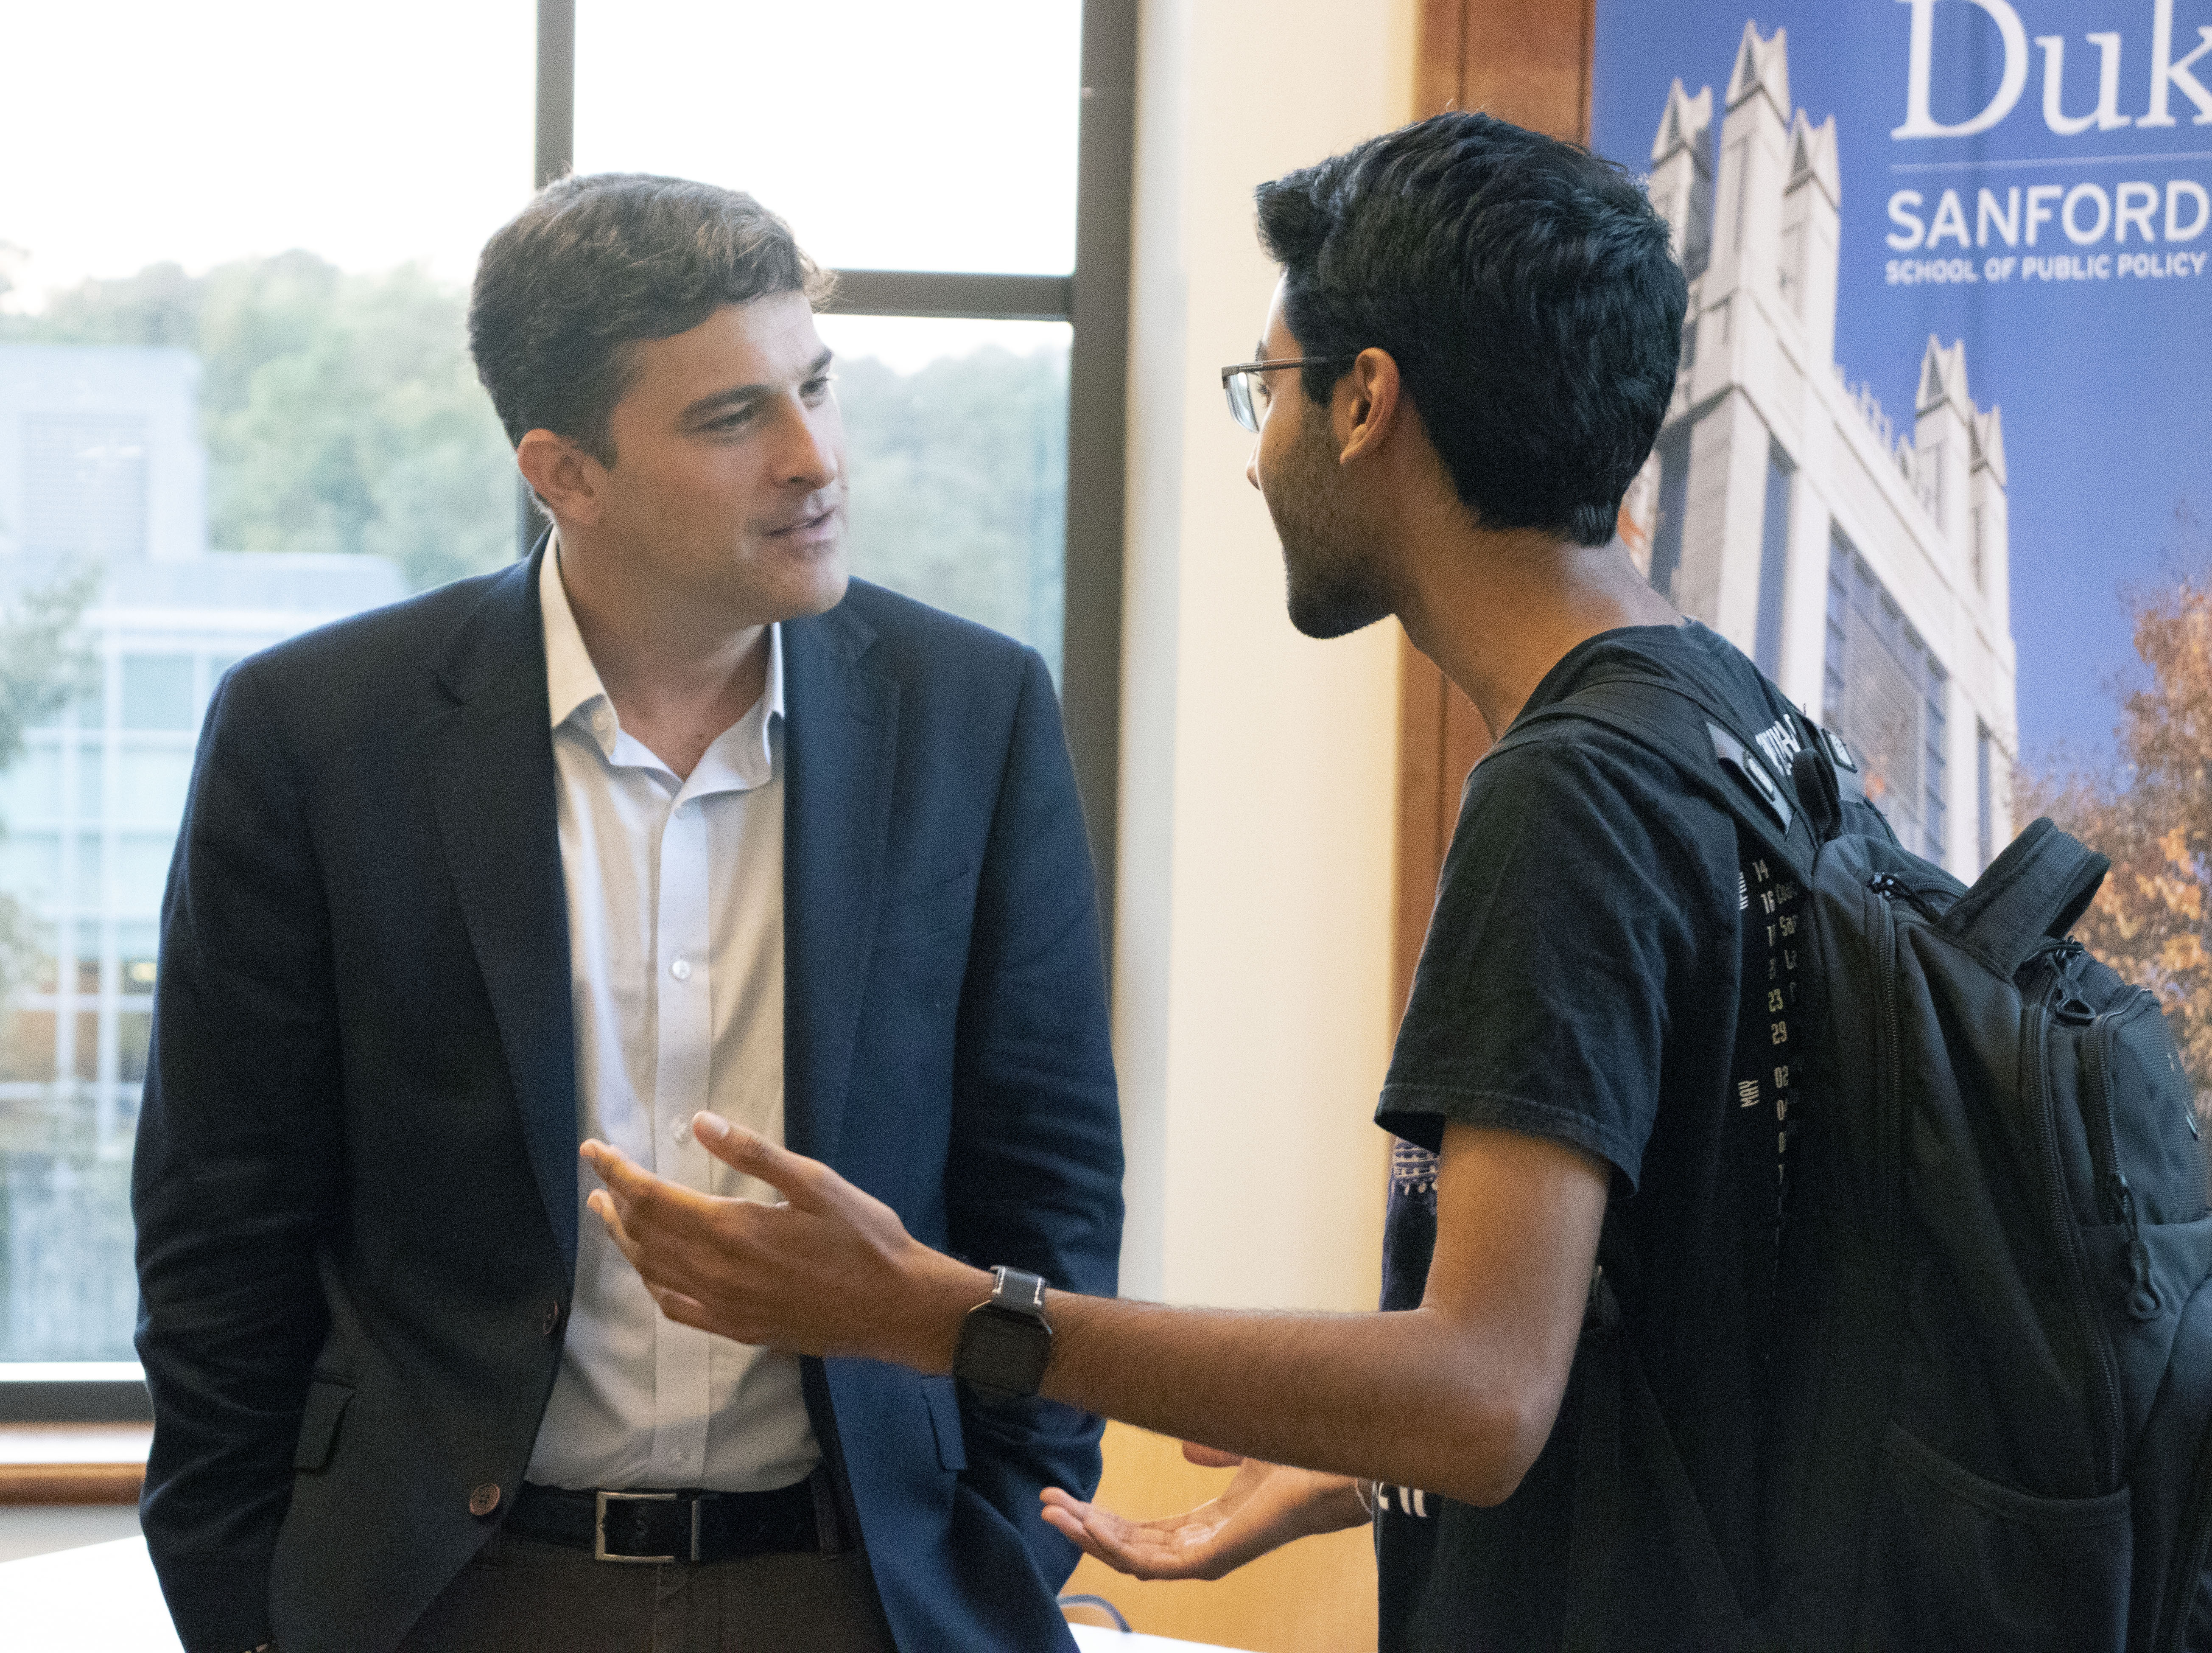 Mark Mazzetti at Duke, talking with students about The Fourth Estate